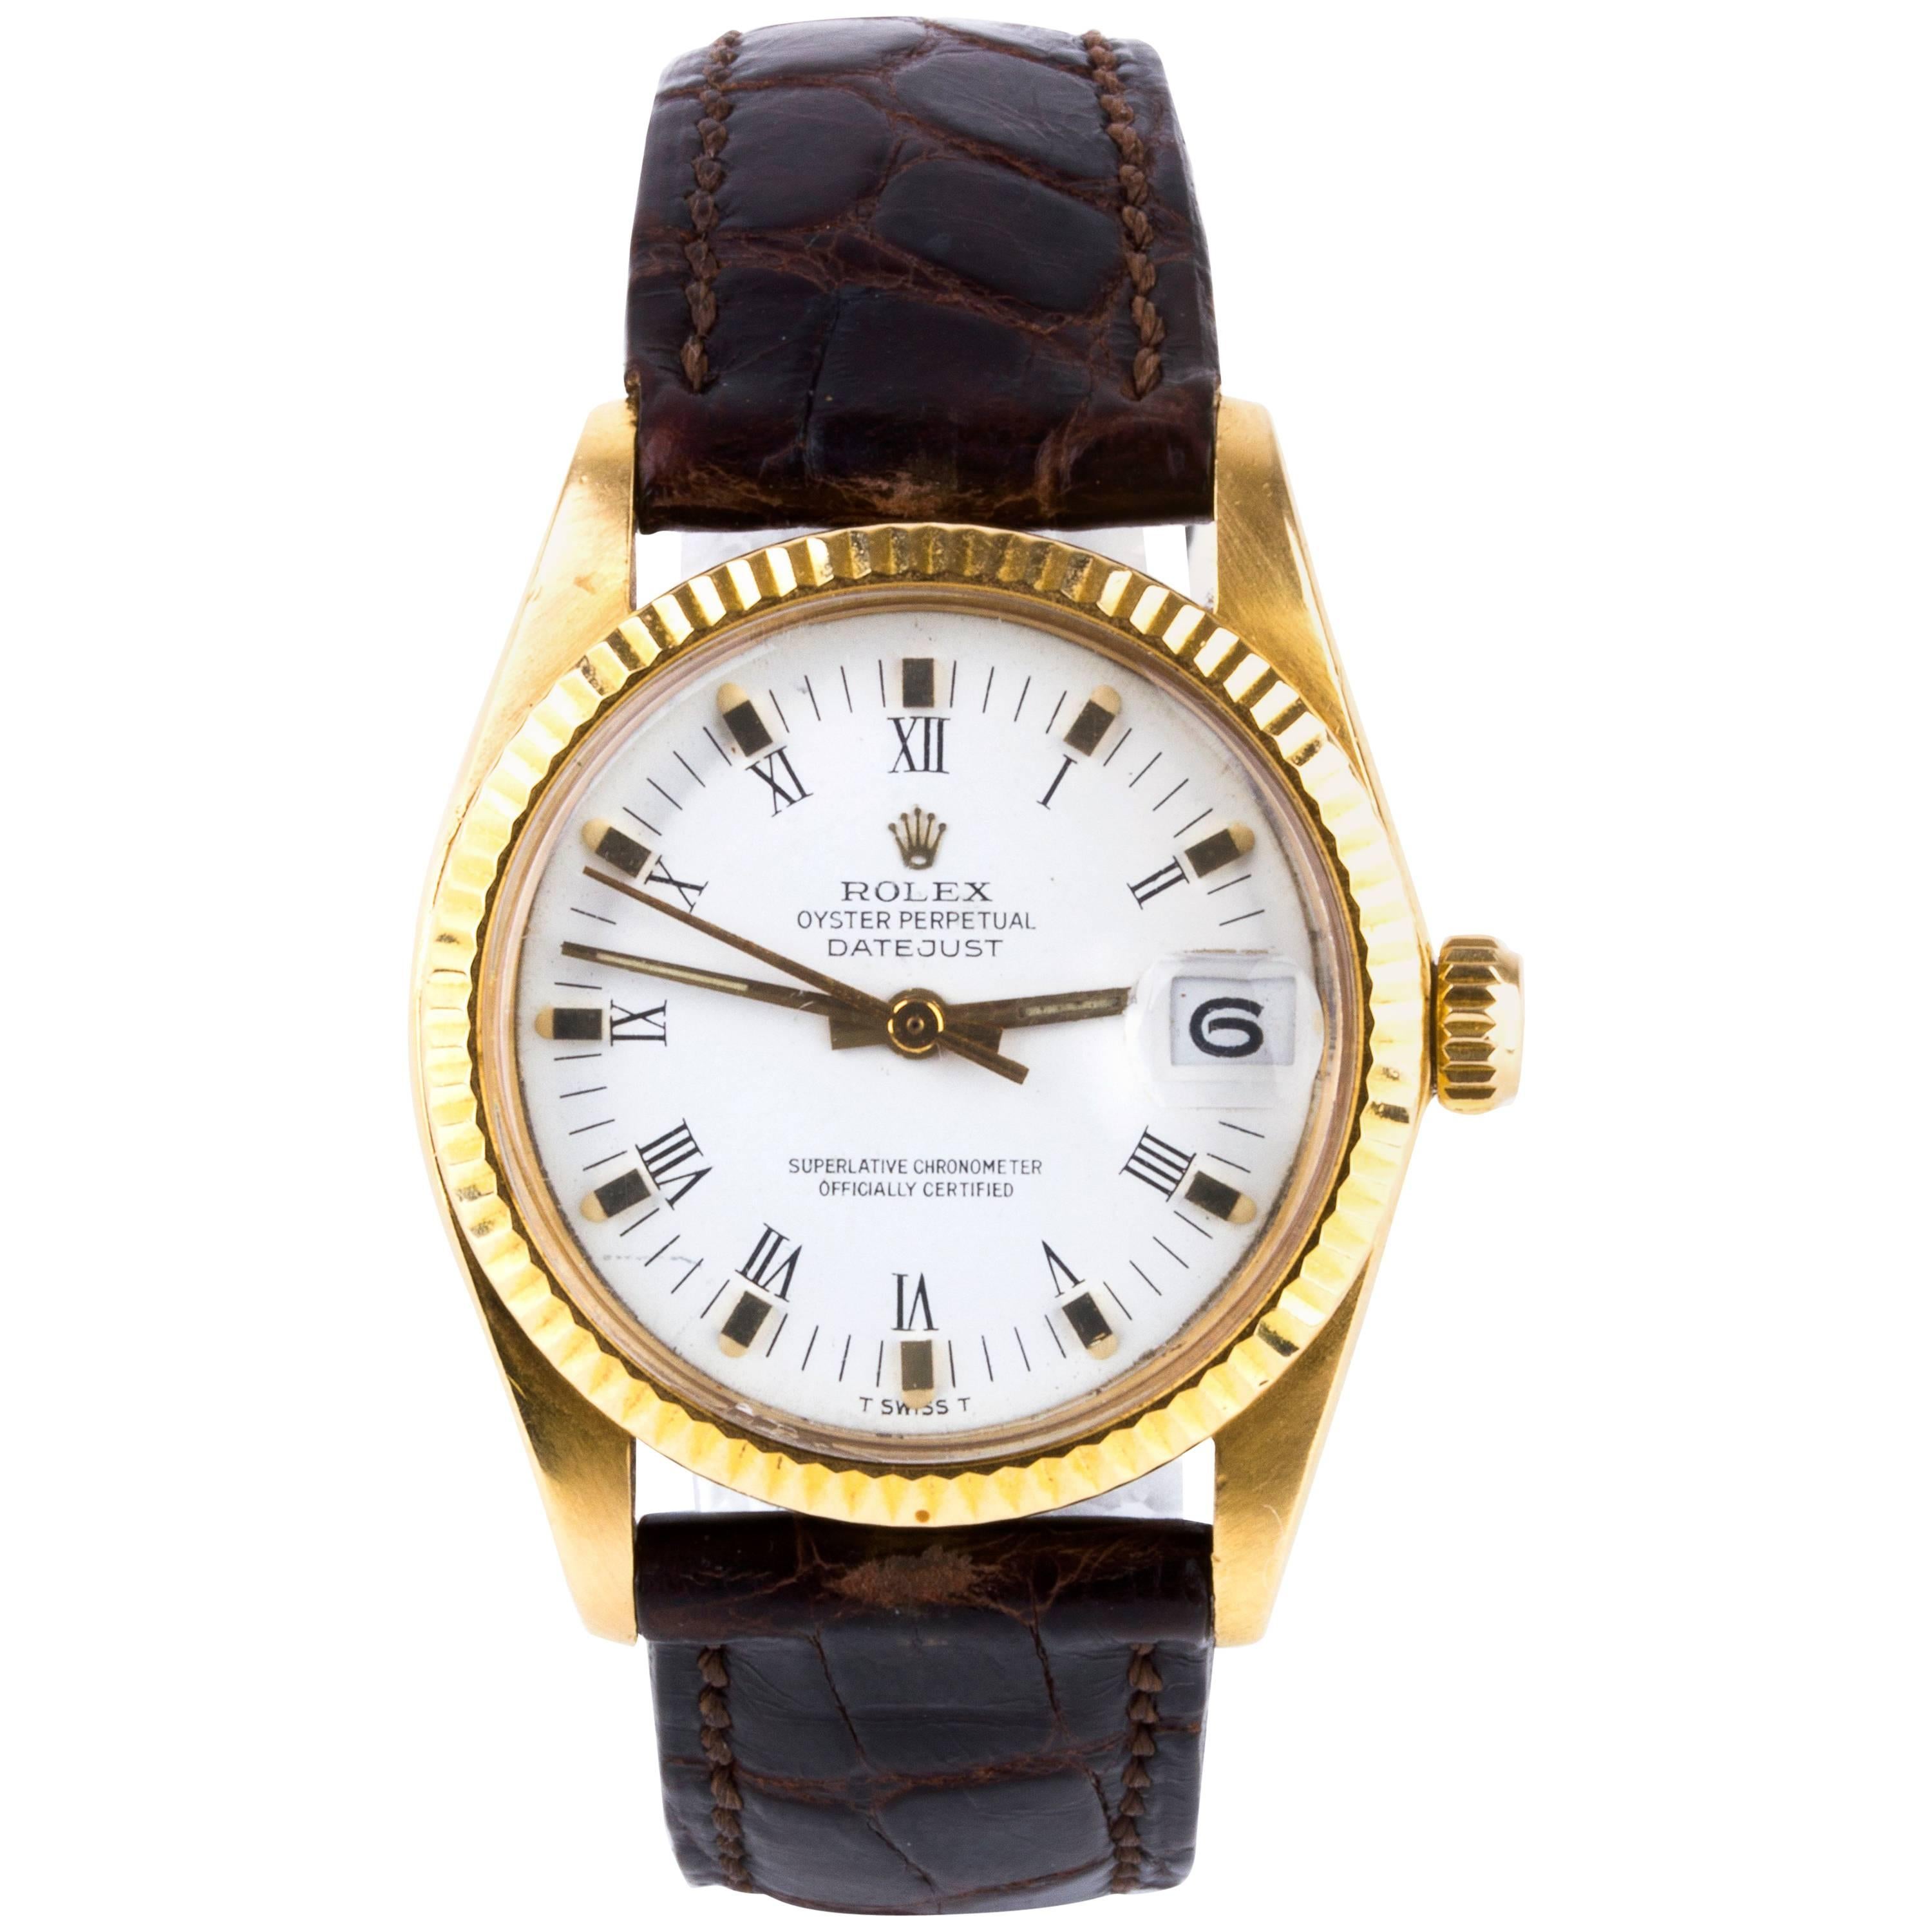 Rolex Oyster Datejust Gold White Dial Wristwatch, 31 mm Ref. 6827, circa 1985 For Sale